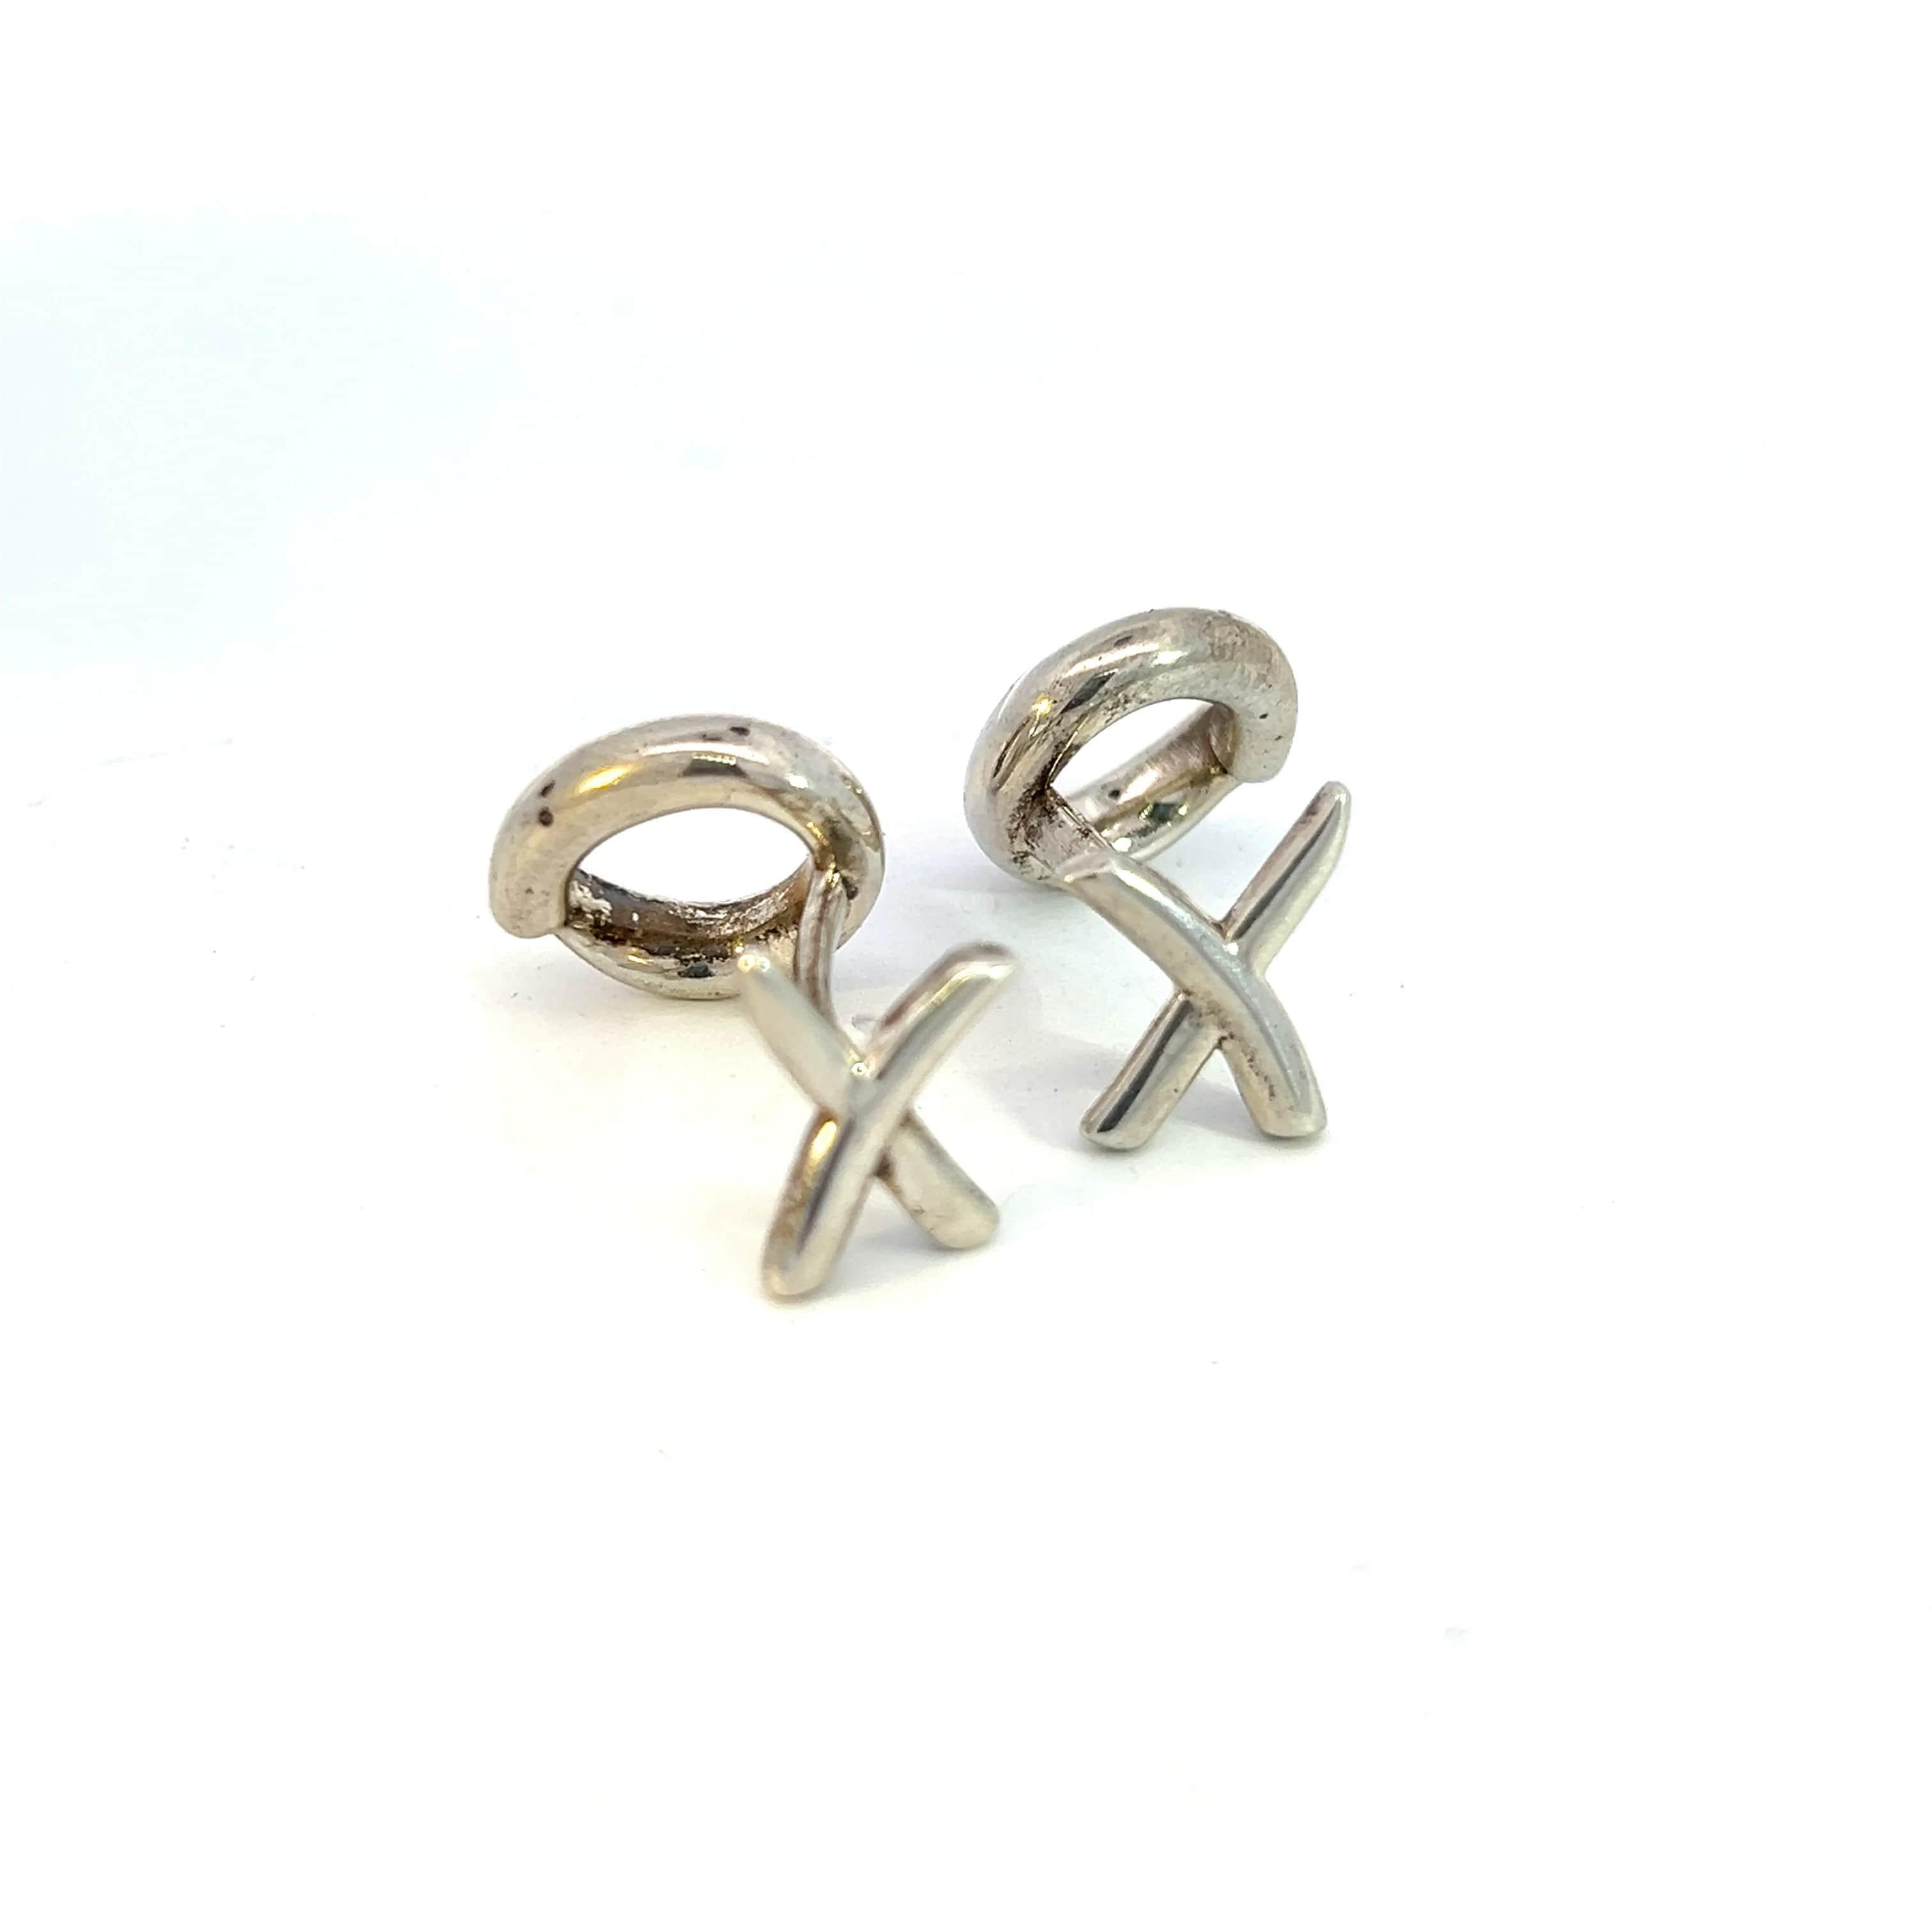 Tiffany & Co Estate Cufflinks Sterling Silver By Paloma Picasso TIF571

TRUSTED SELLER SINCE 2002

PLEASE SEE OUR HUNDREDS OF POSITIVE FEEDBACKS FROM OUR CLIENTS!!

FREE SHIPPING

DETAILS
Designer: Paloma Picasso
Metal: Sterling Silver
Weight: 14